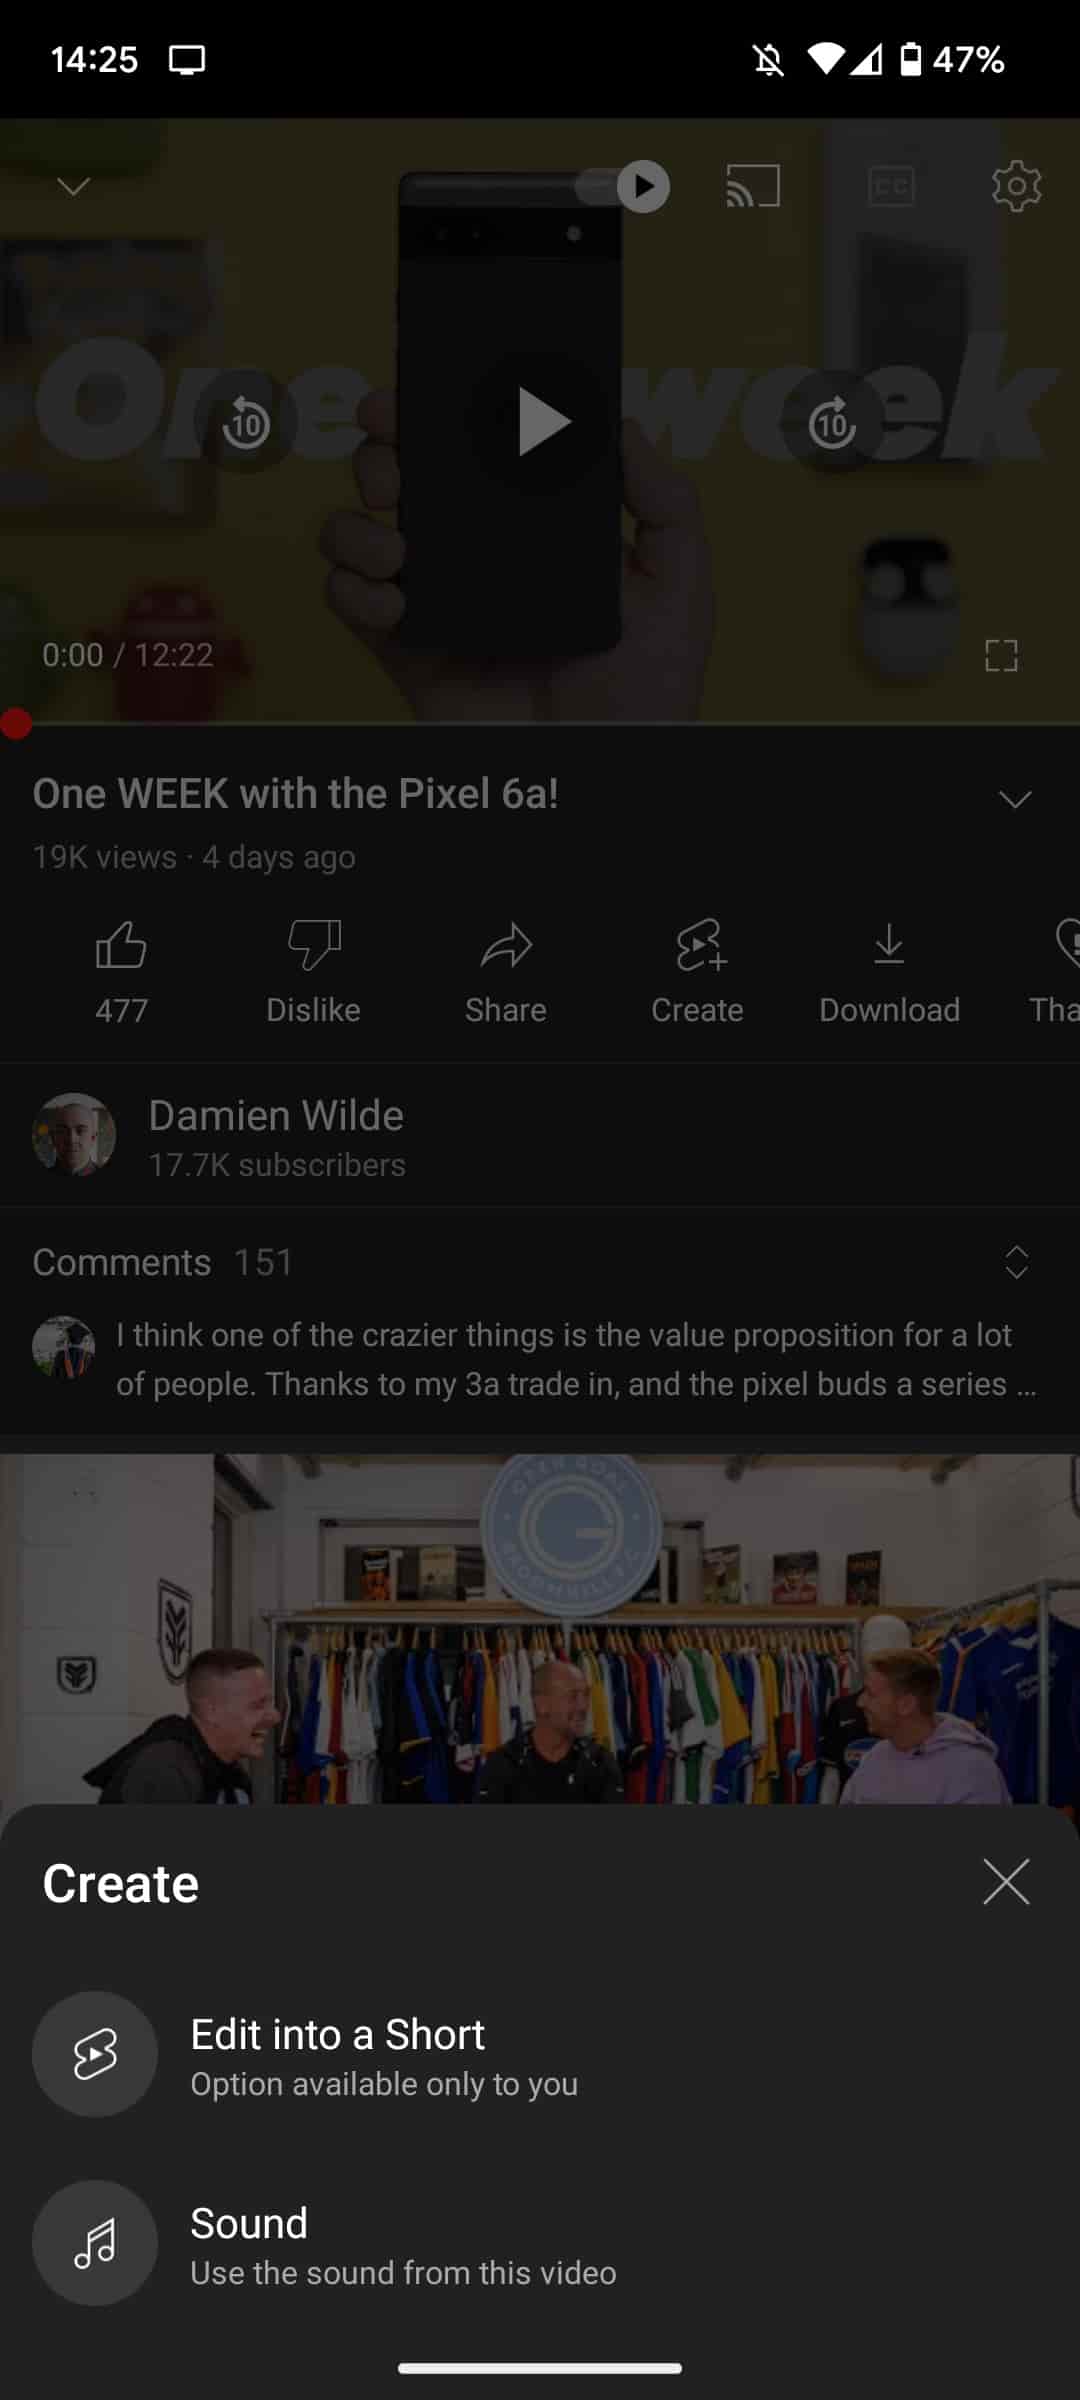 You can now create Shorts from existing videos in YouTube